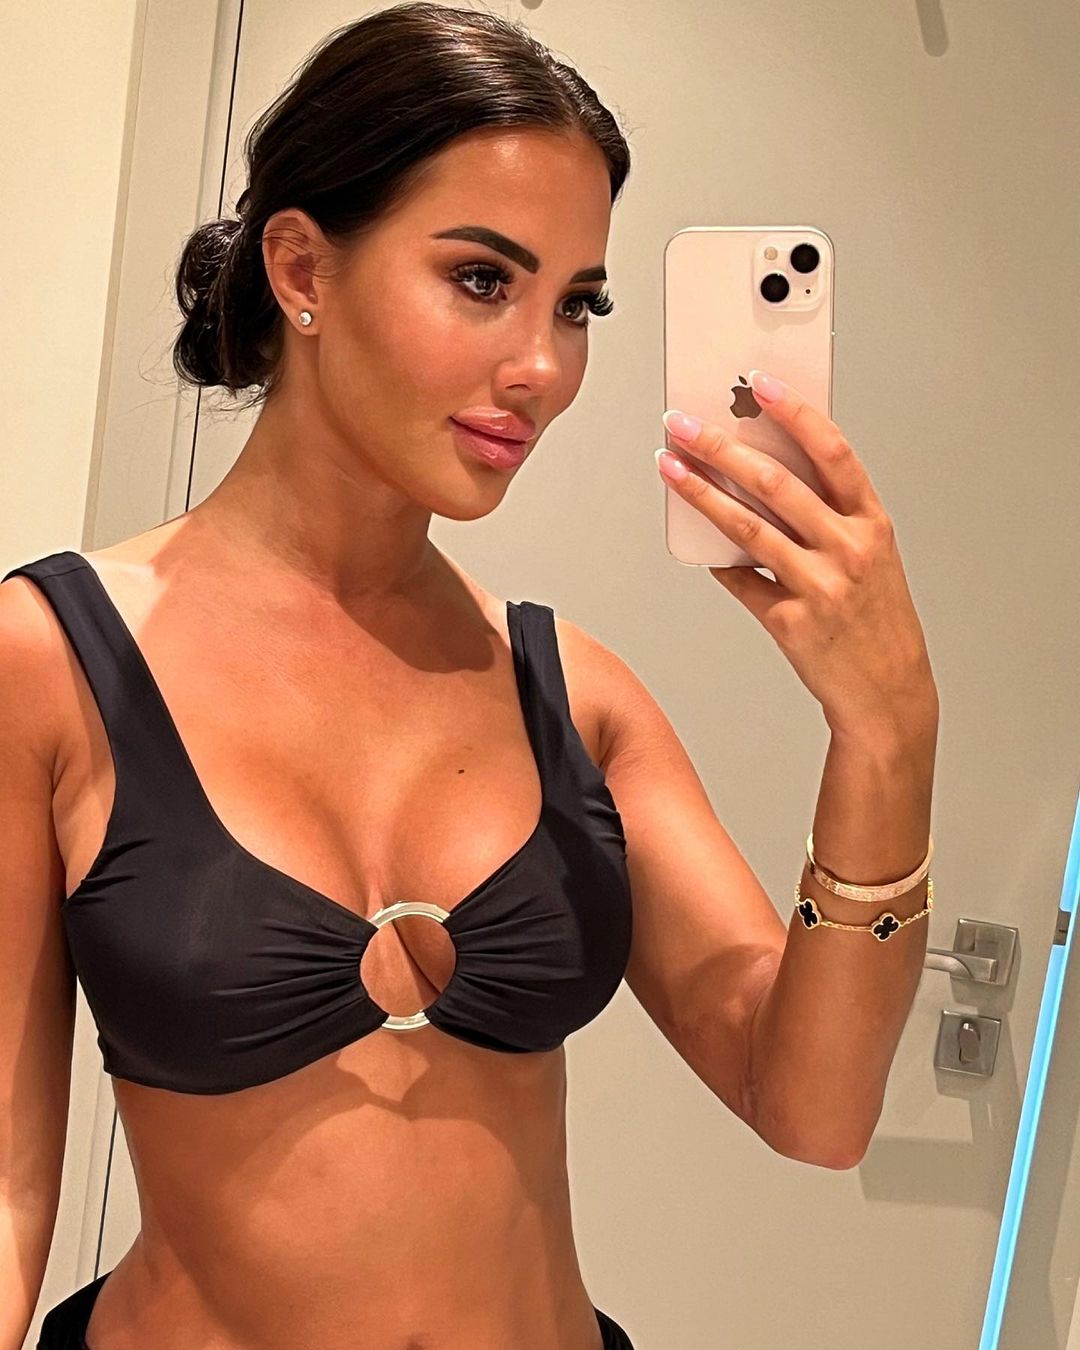 Towie’s Yazmin Oukhellou shows off her incredible curves in bikini after quitting show for new career